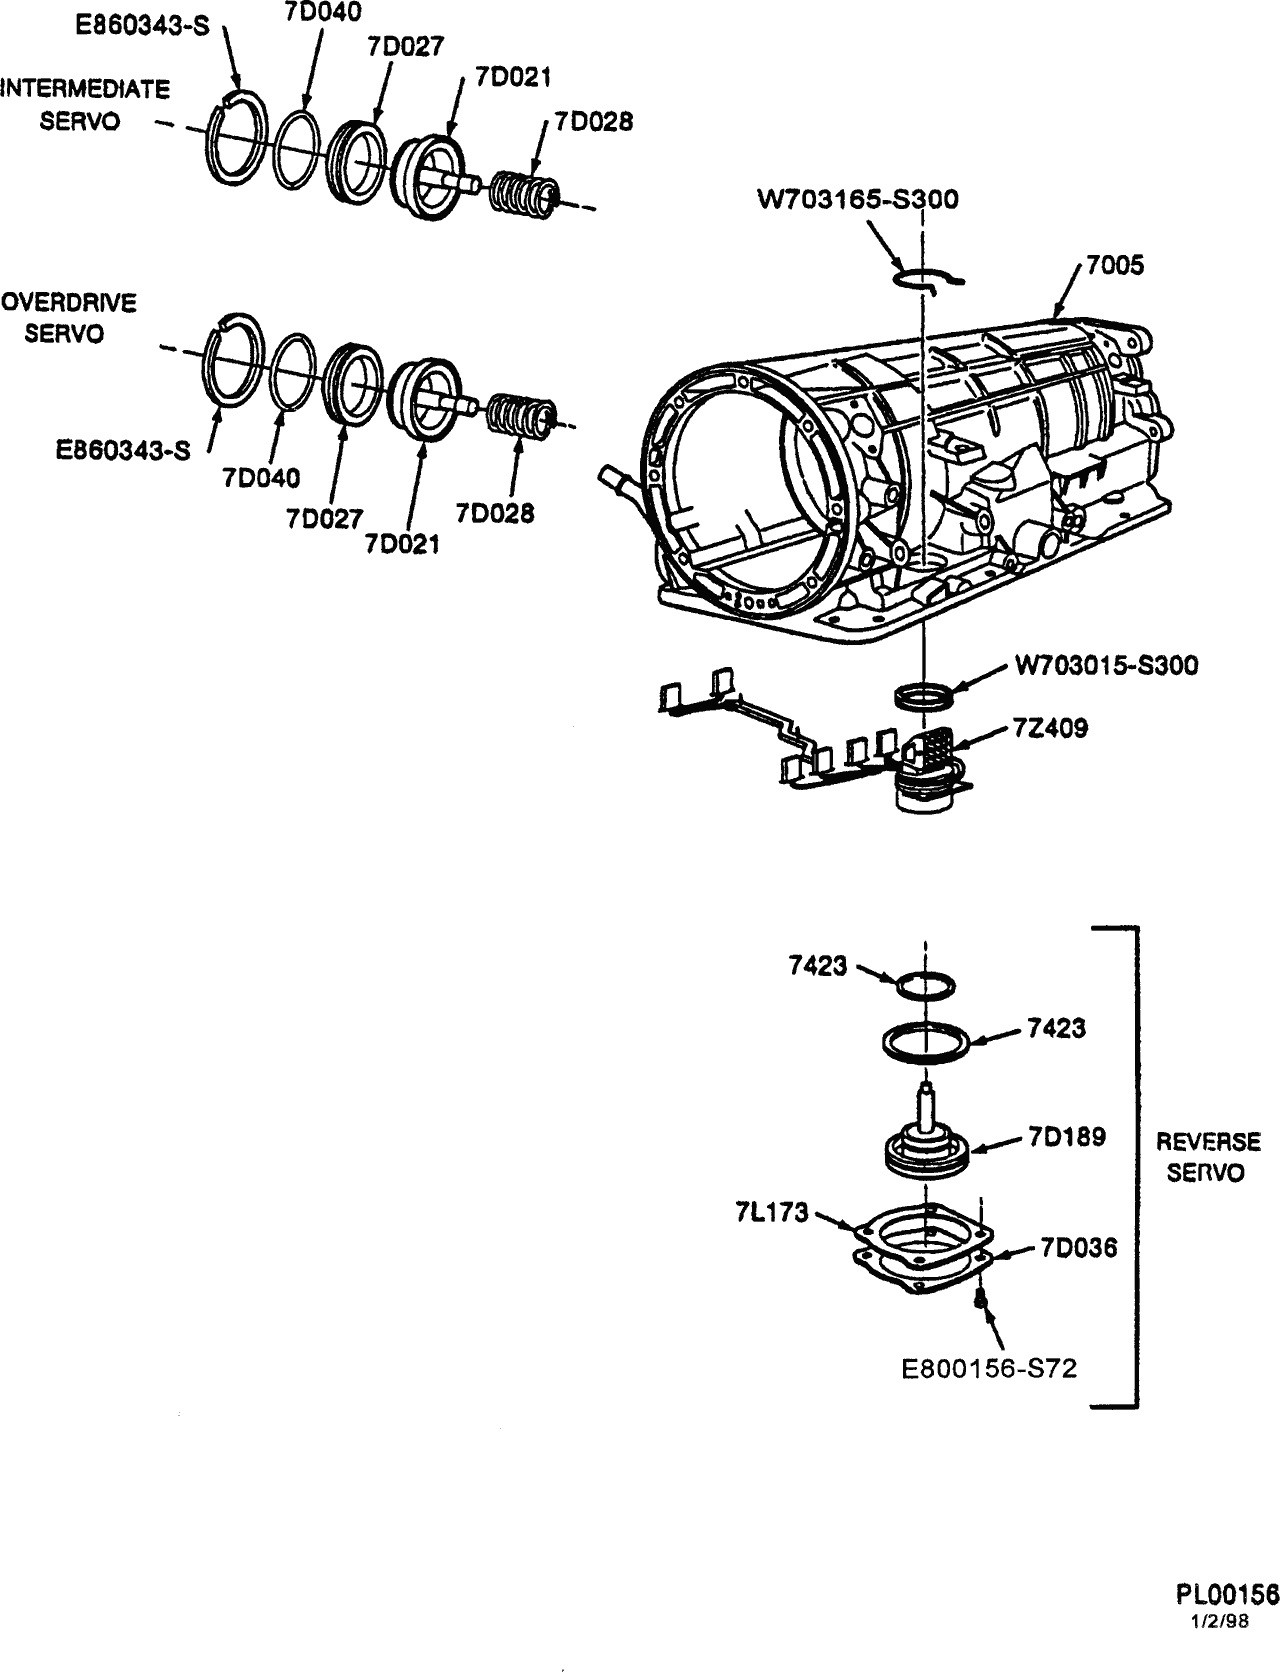 2002 ford Ranger Parts Diagram Trans Leak Exploded View Of 4r44e Automatic Trans Ranger forums Of 2002 ford Ranger Parts Diagram